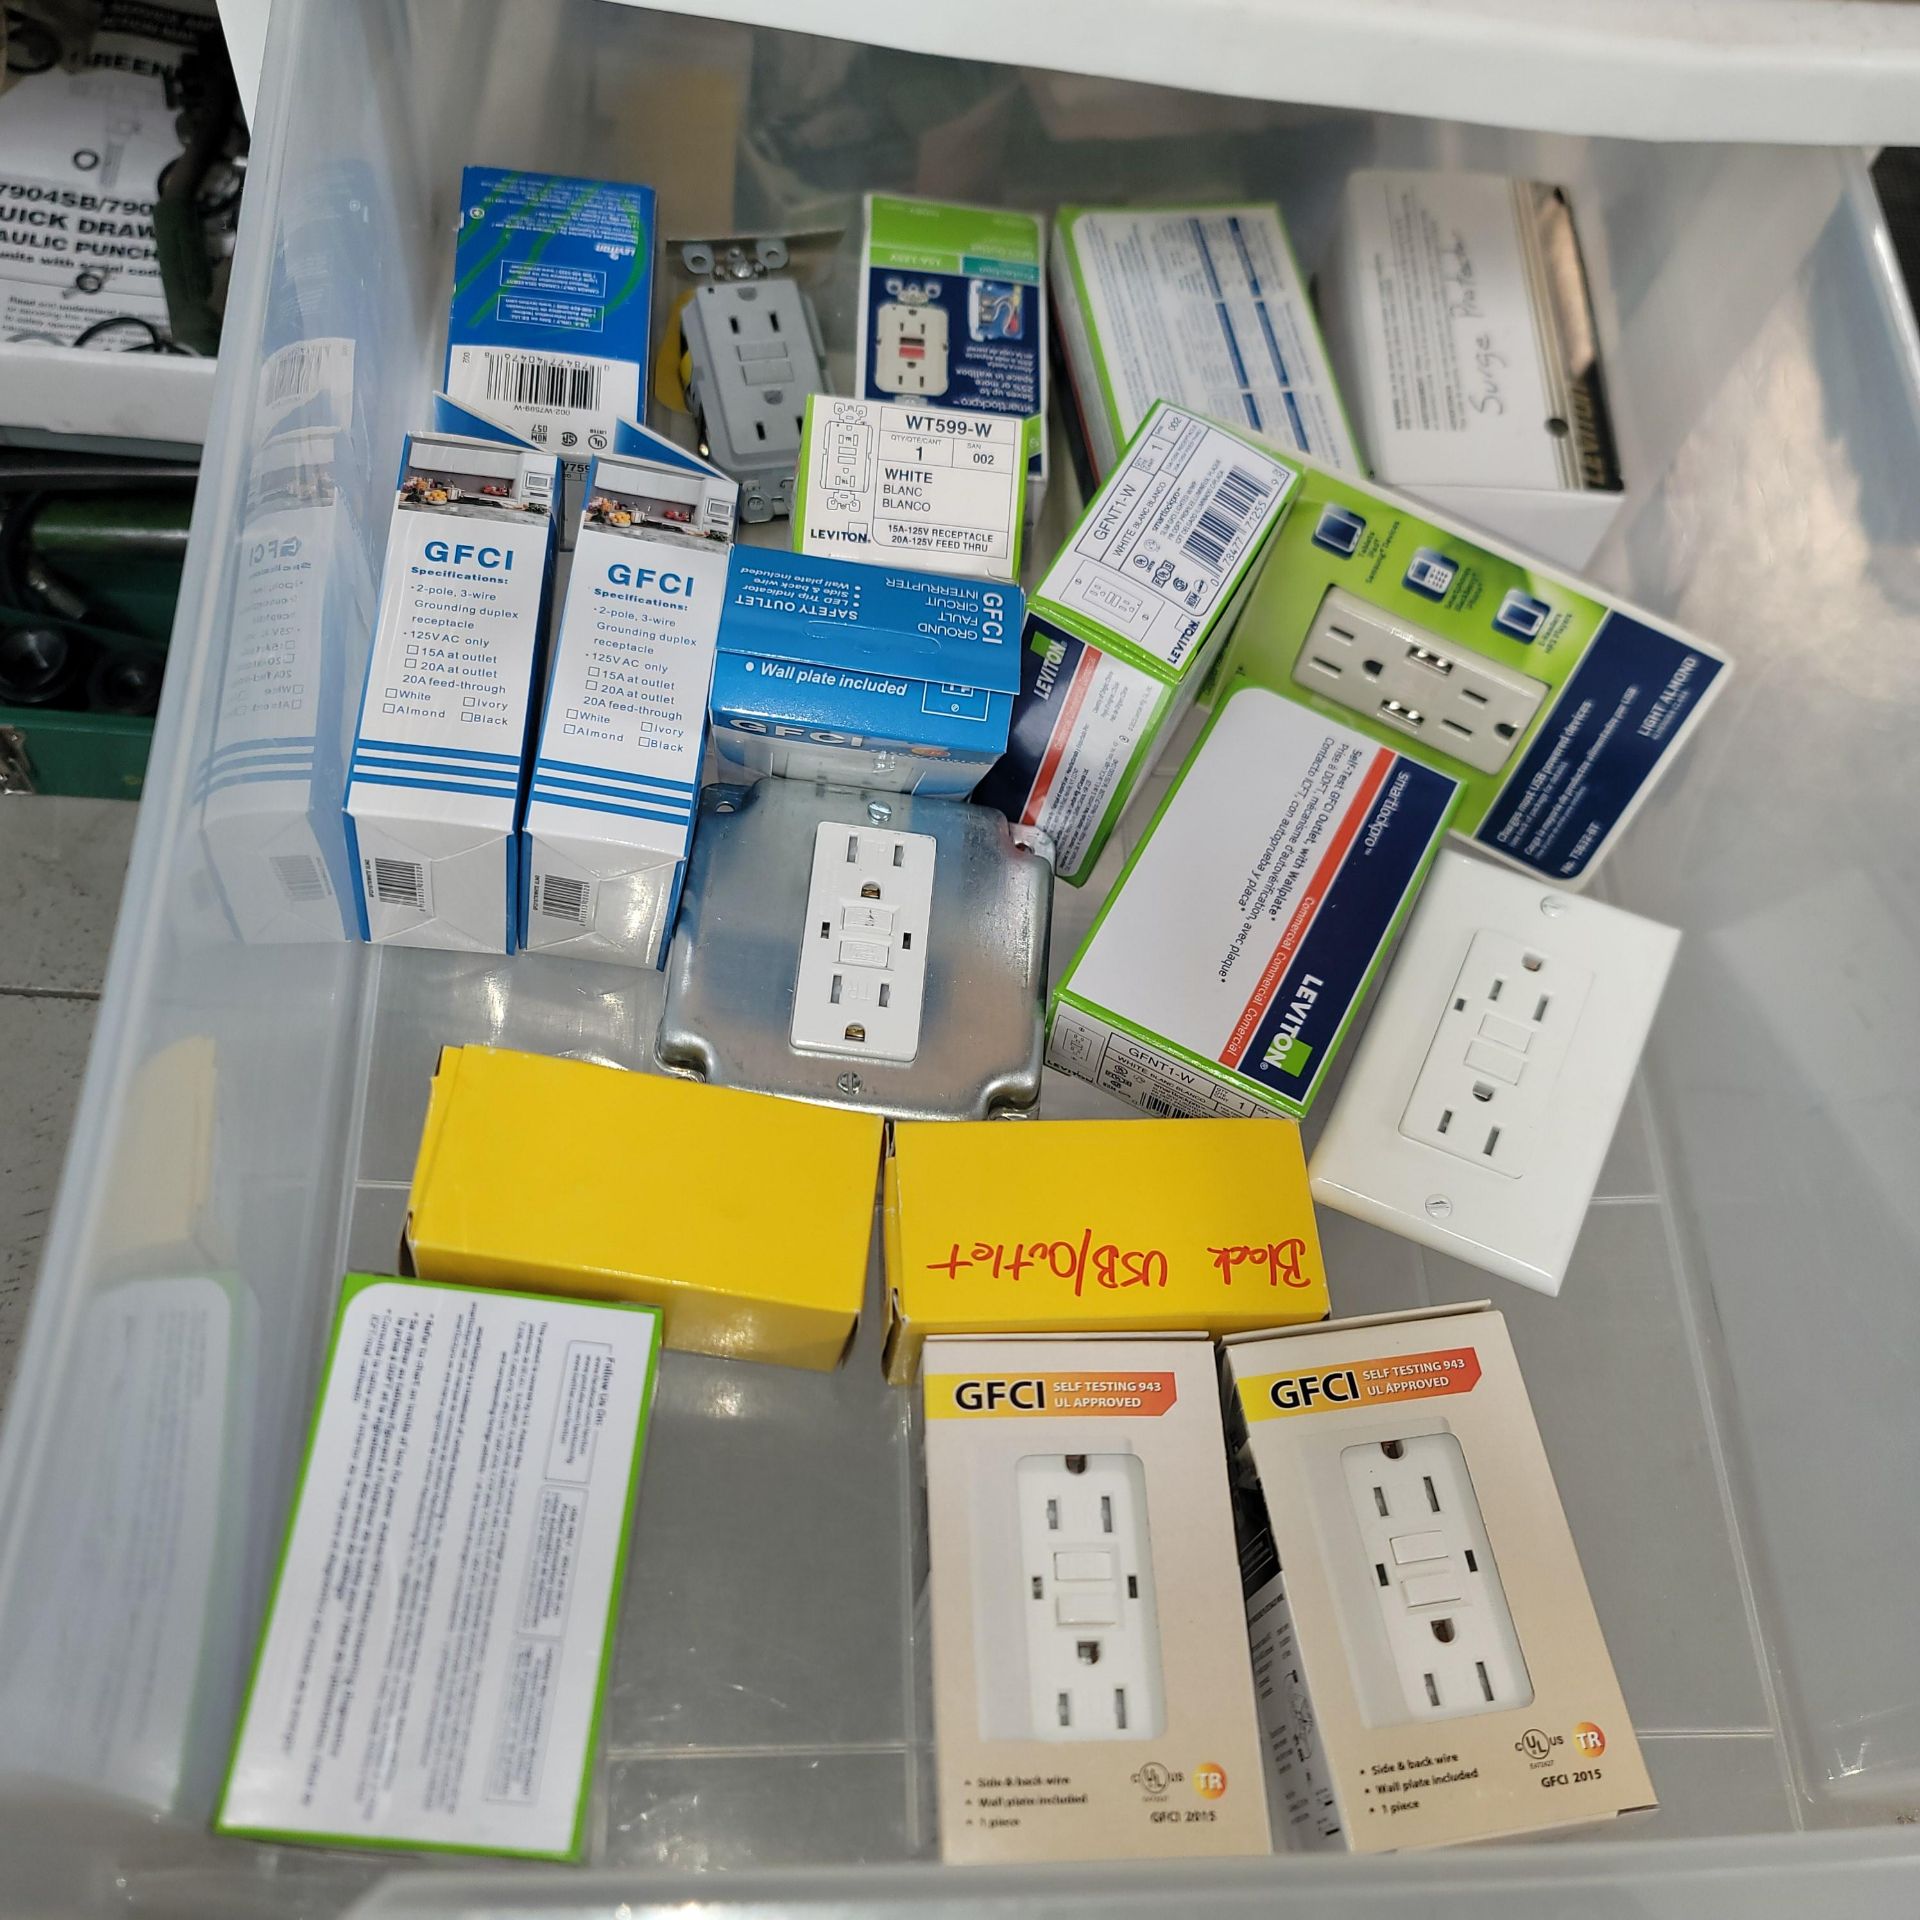 LOT - PORTABLE PLASTIC 4-DRAWER STORAGE CART, W/ CONTENTS OF GCFI RECEPTACLES - Image 2 of 6